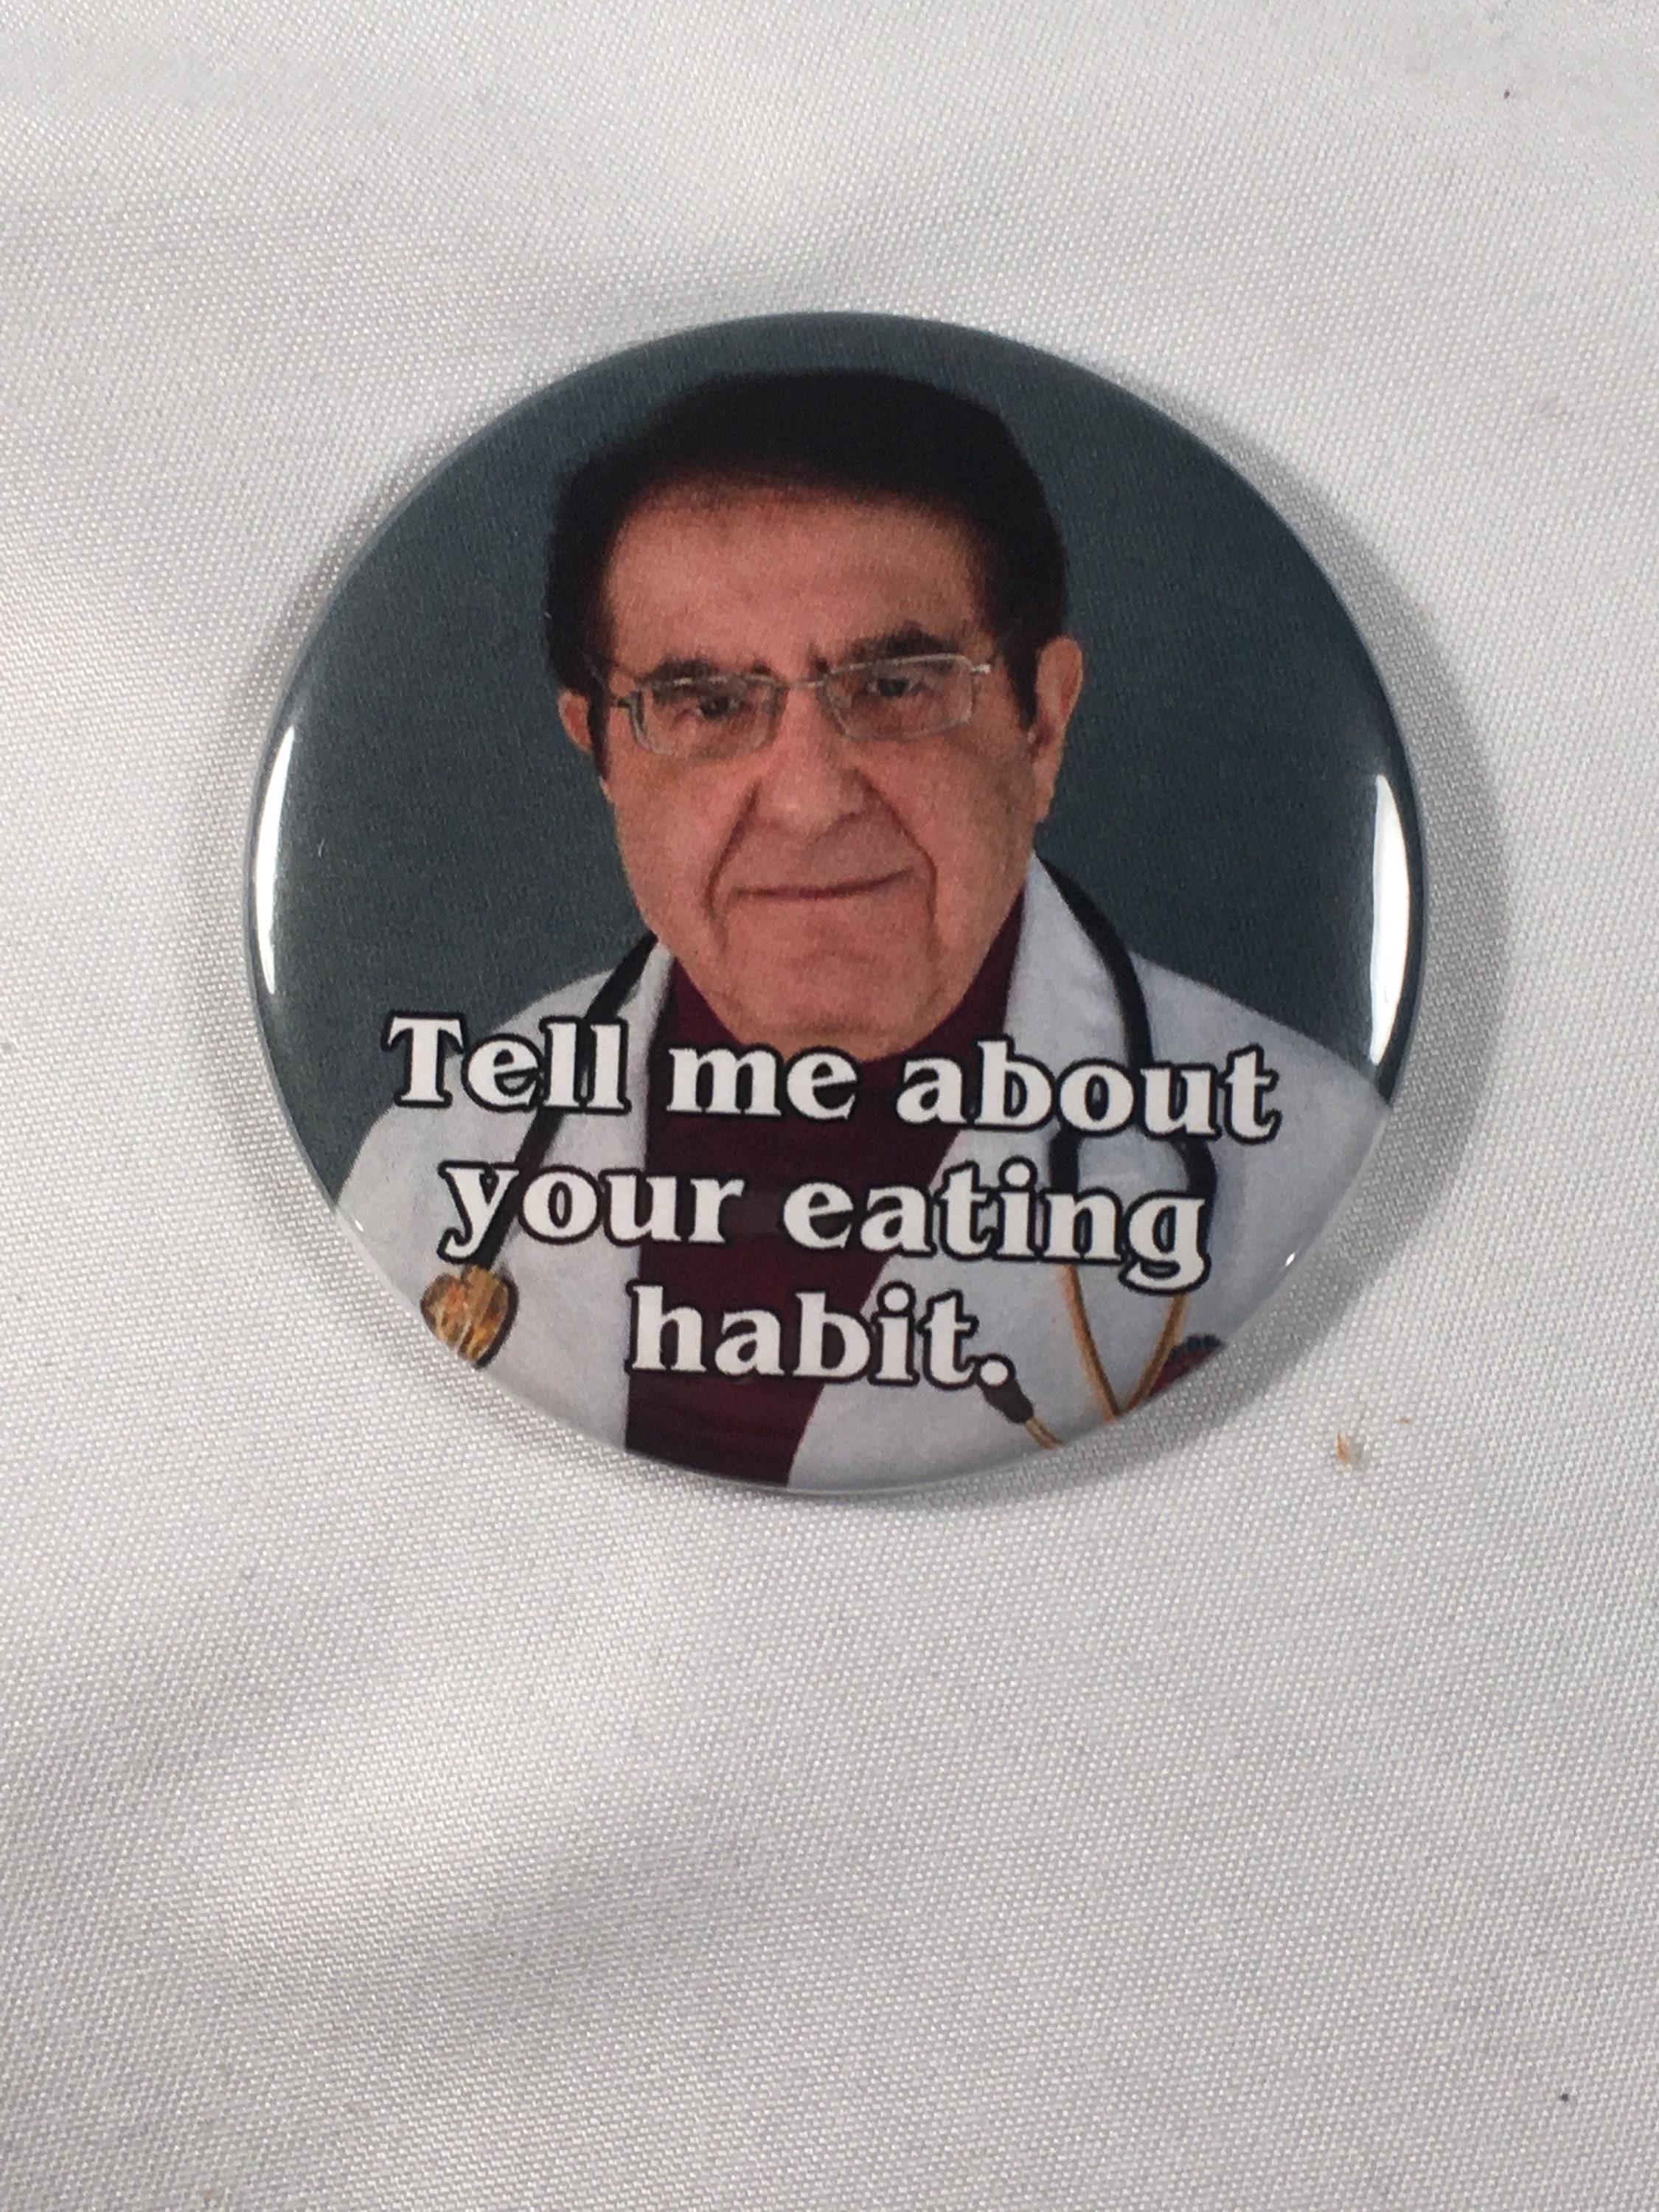 My 600lb Life Dr. Nowzaradan Magnet Pin or Magnet no Excuse 